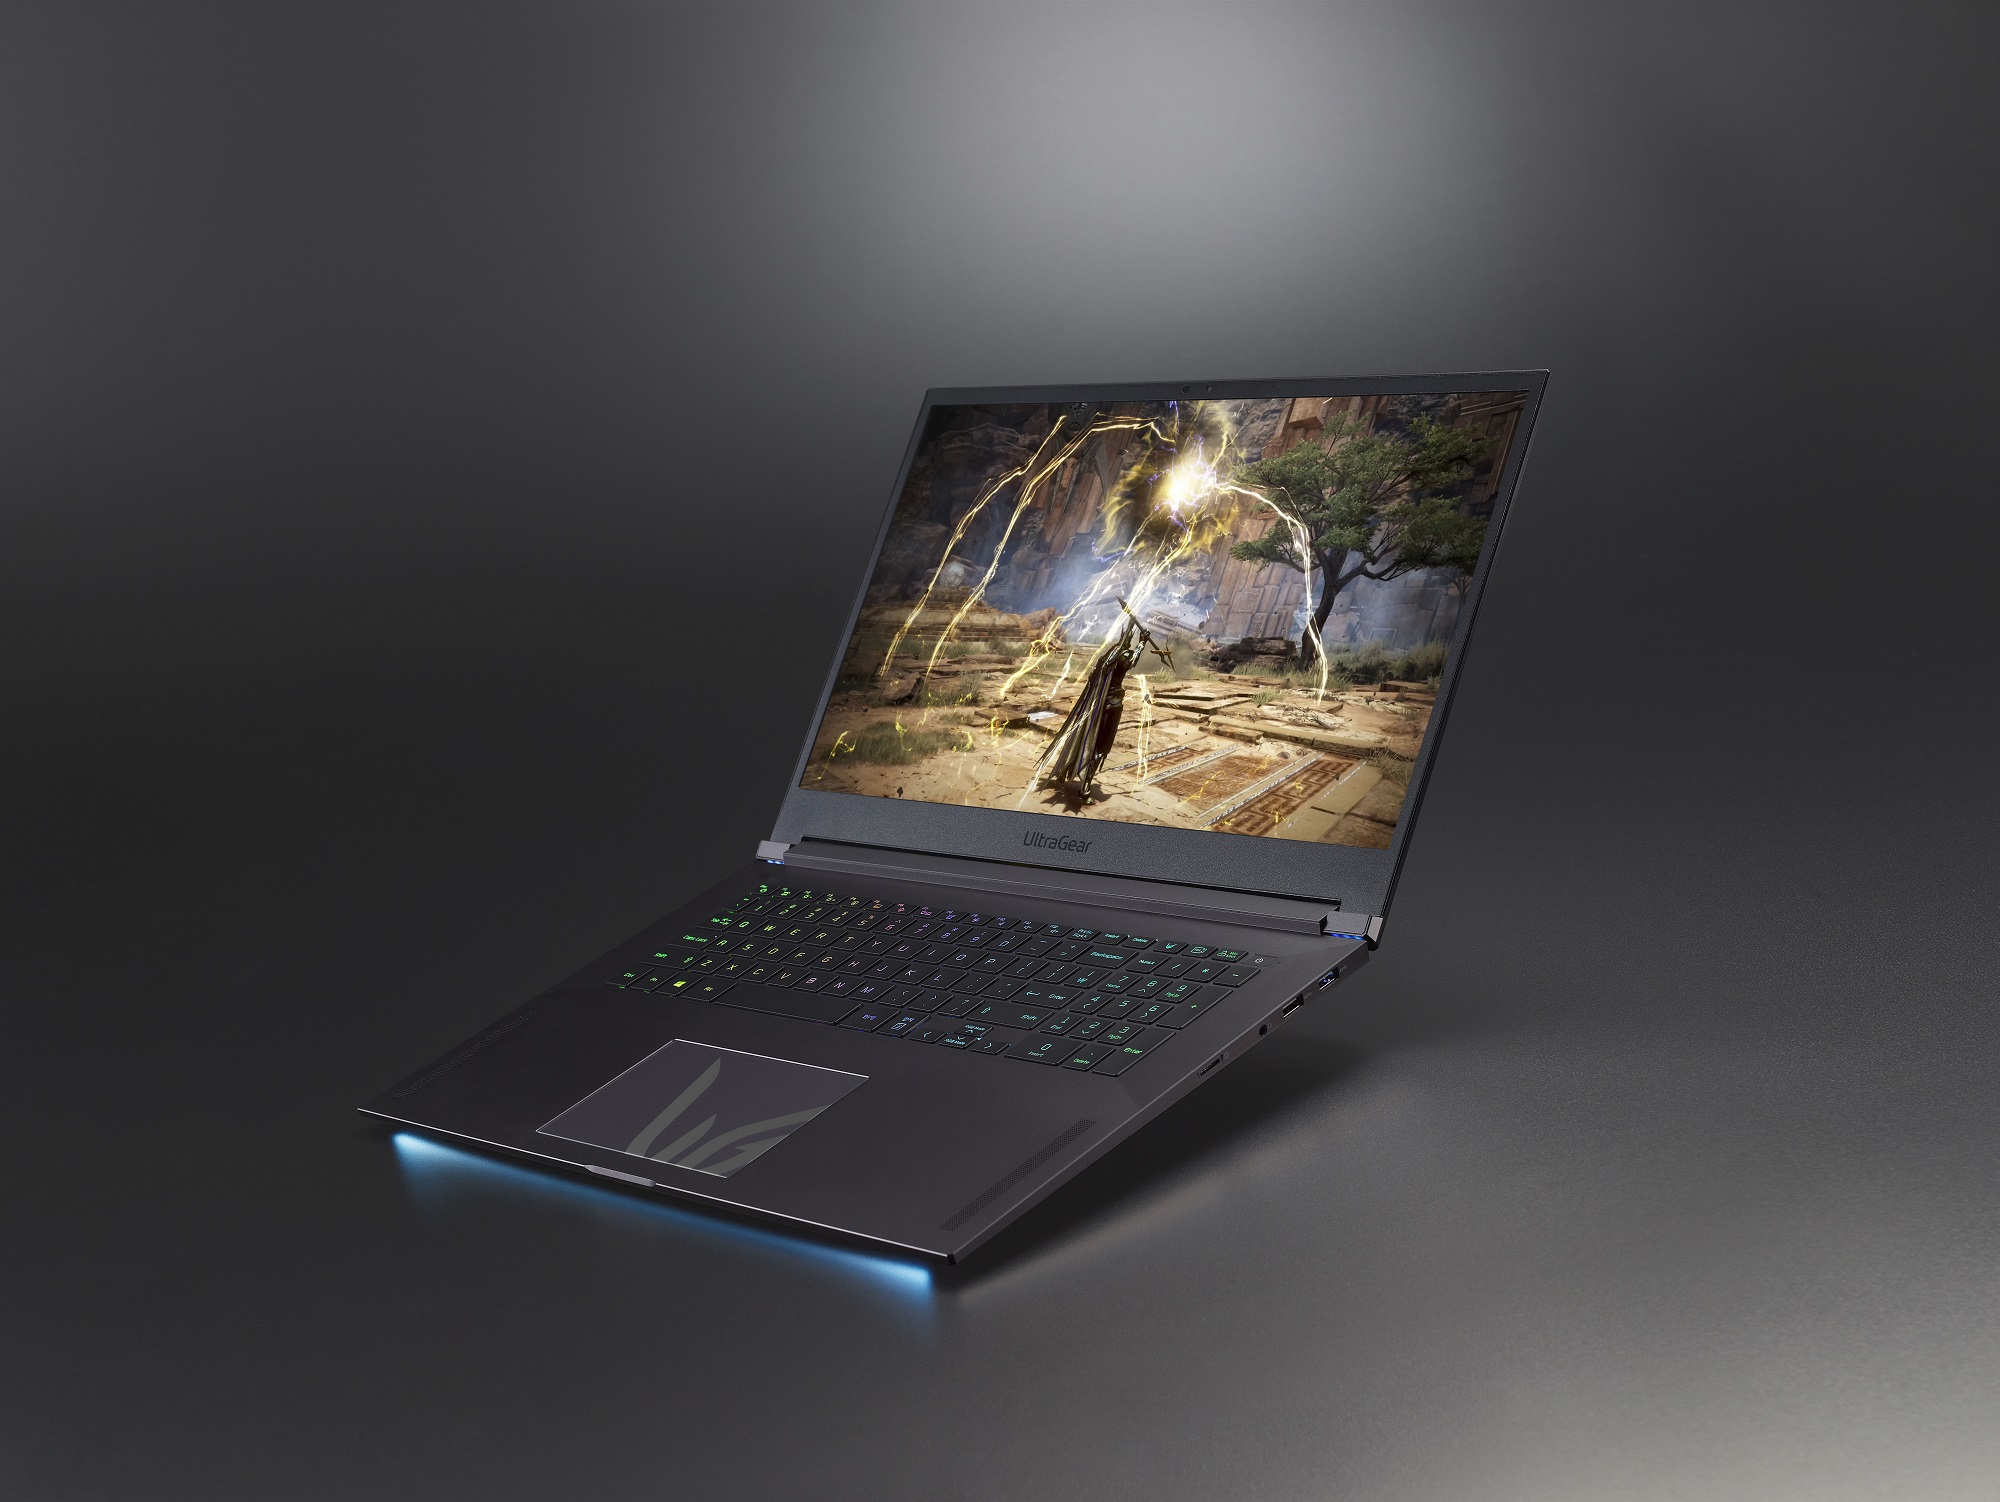 LG First Official Gaming Laptop Features An RTX 3080 Graphics Card